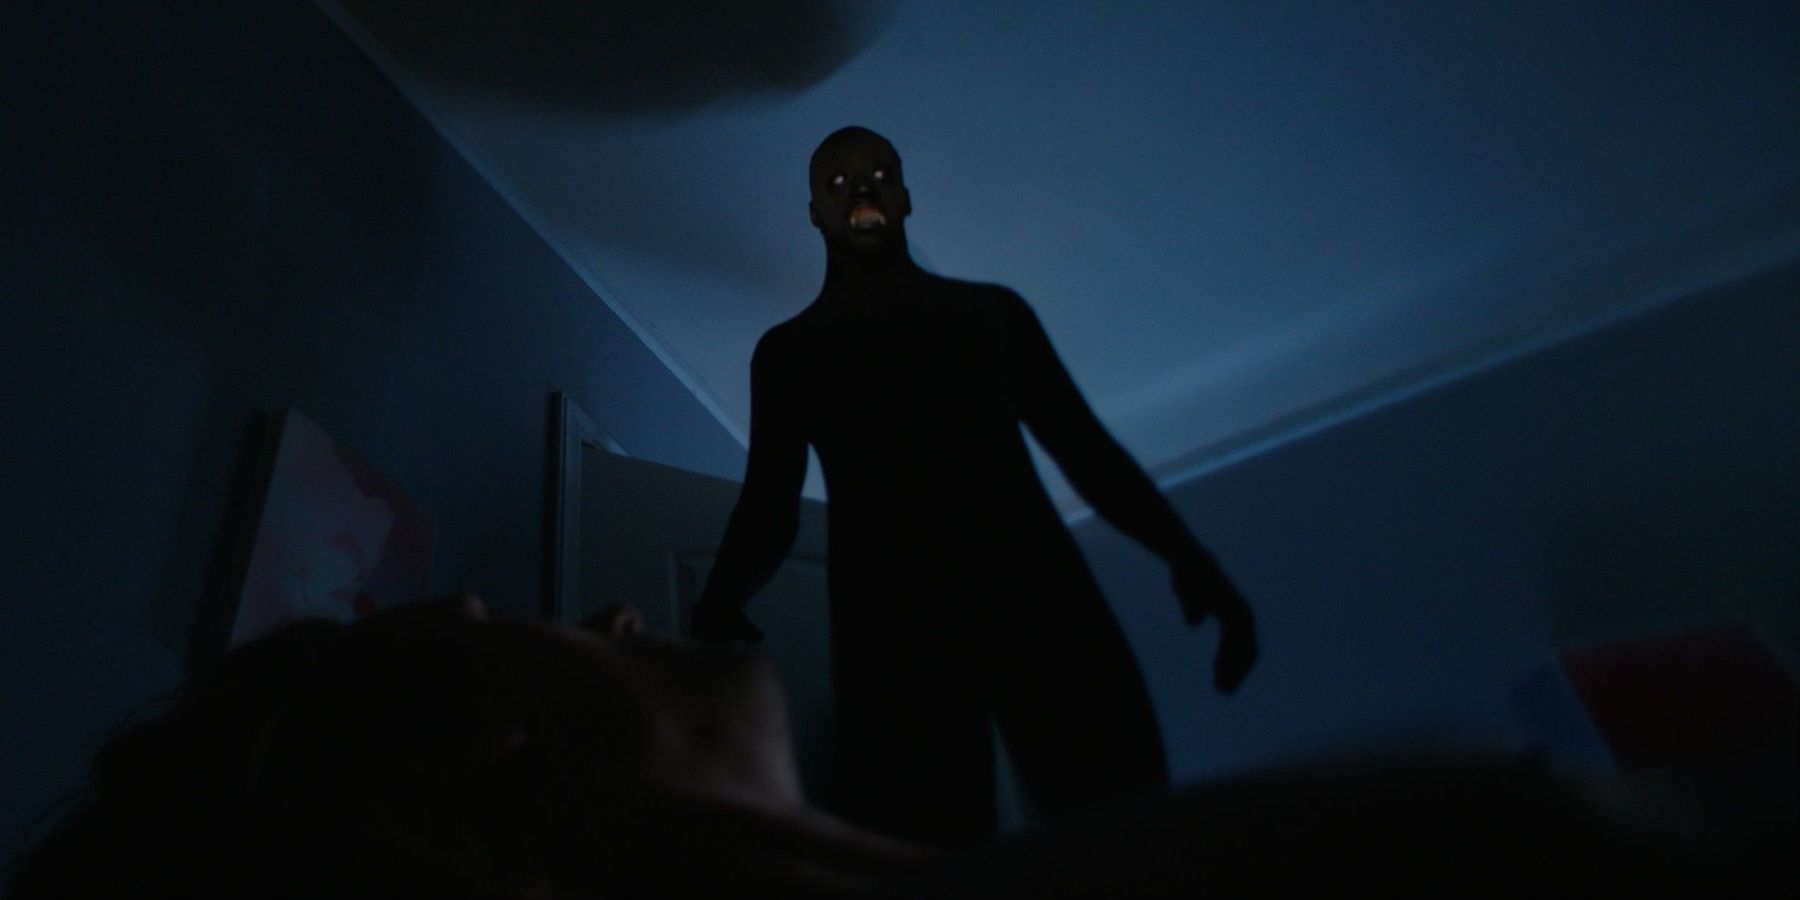 A sleep paralysis demon as depicted in the 2015 documentary The Nightmare.